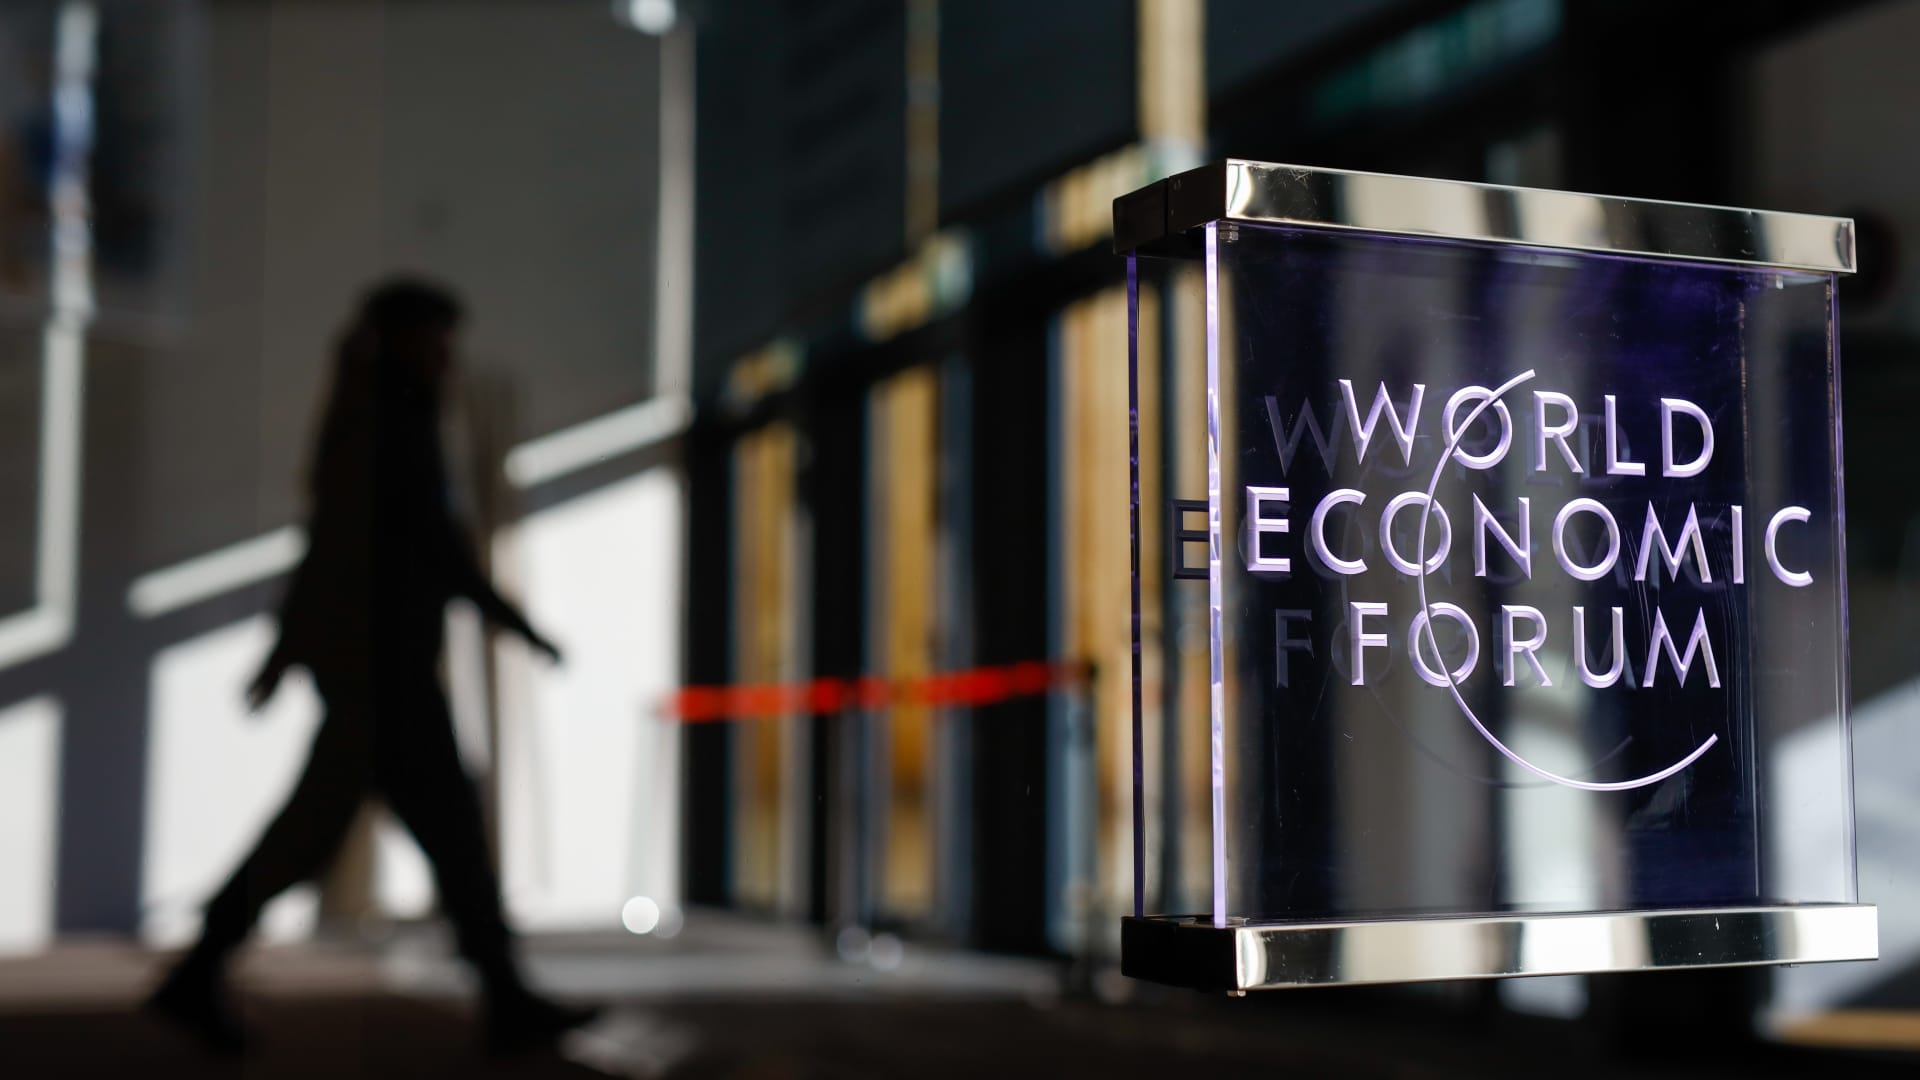 A logo sits on a window at the entrance hall of the Congress Center ahead of the World Economic Forum (WEF) in Davos, Switzerland, on Monday, Jan. 20, 2020.